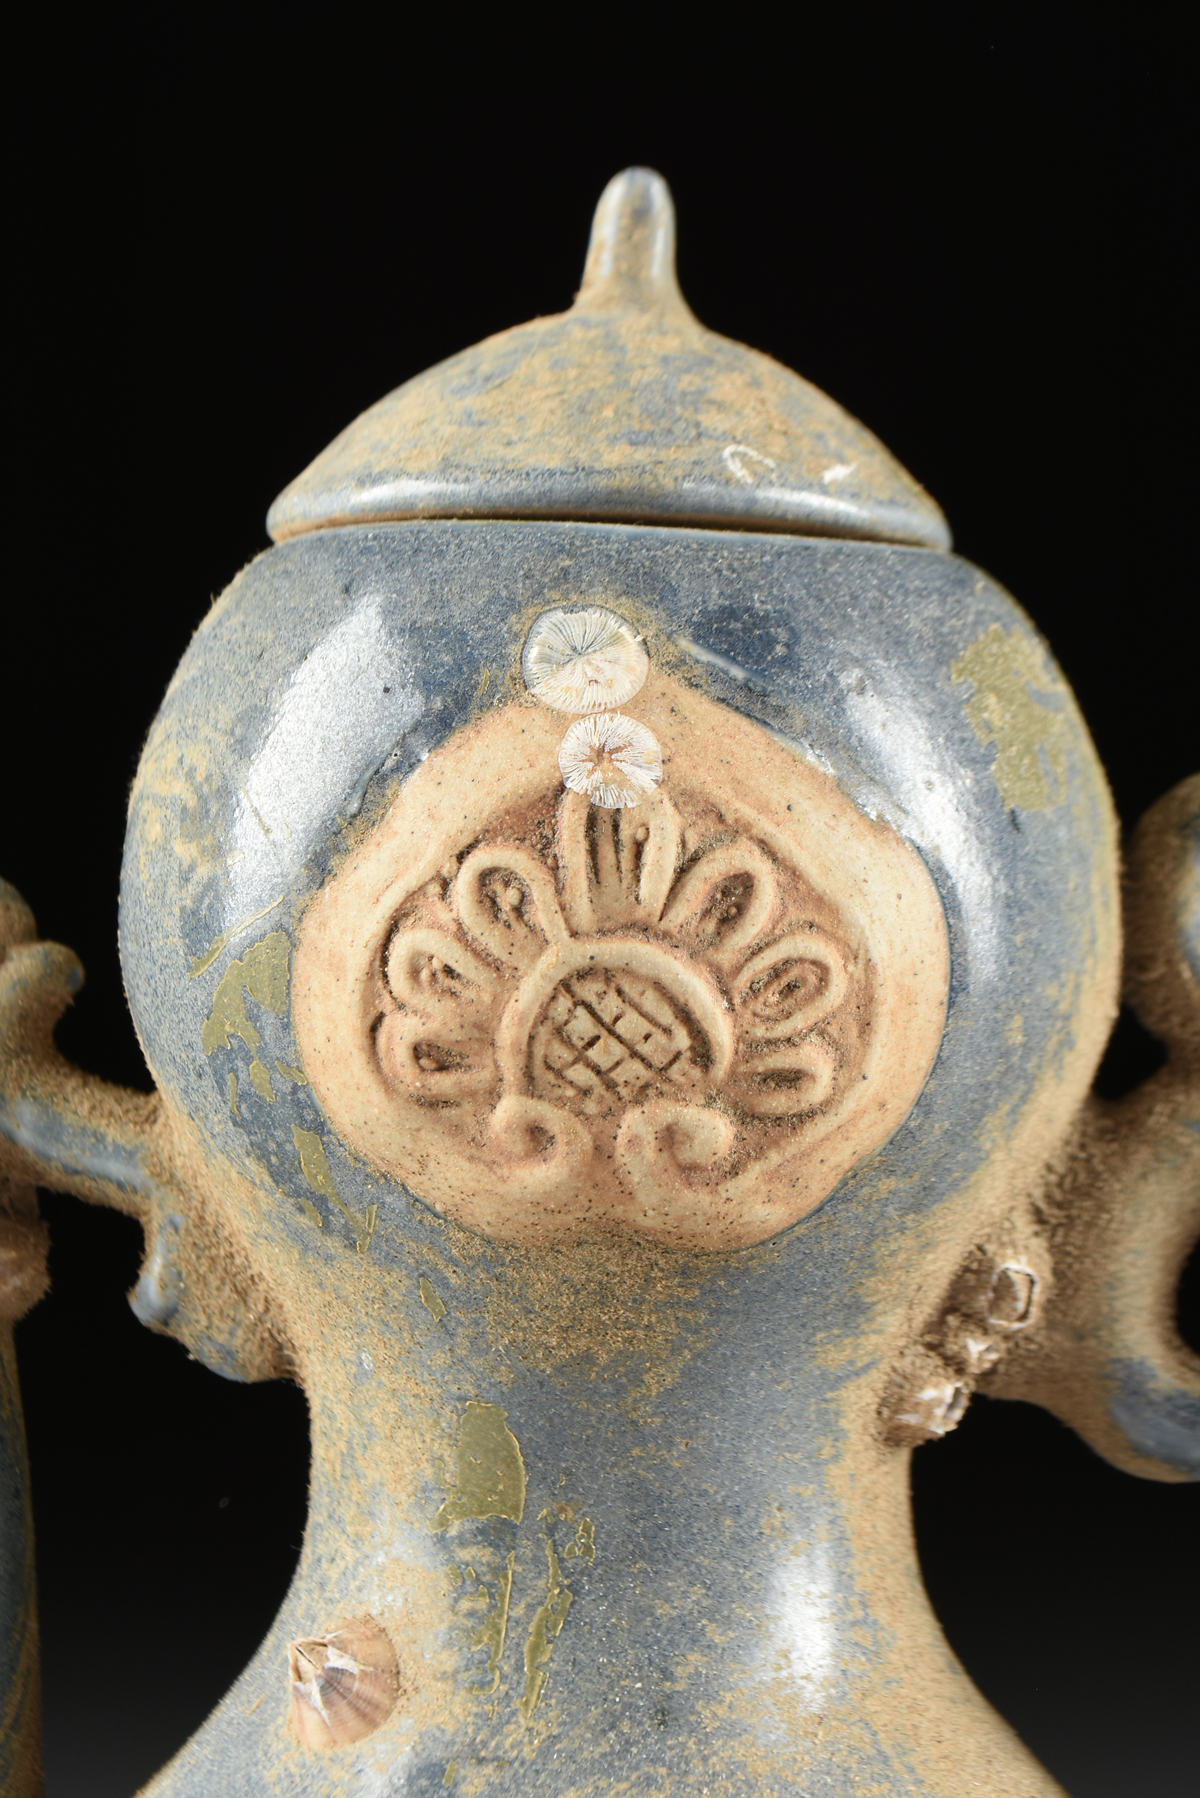 A VIETNAMESE/ANNAMESE BLUE GLAZED DOUBLE GOURD PORCELAIN EWER, SHIPWRECK ARTIFACT, 15TH/16TH - Image 2 of 11